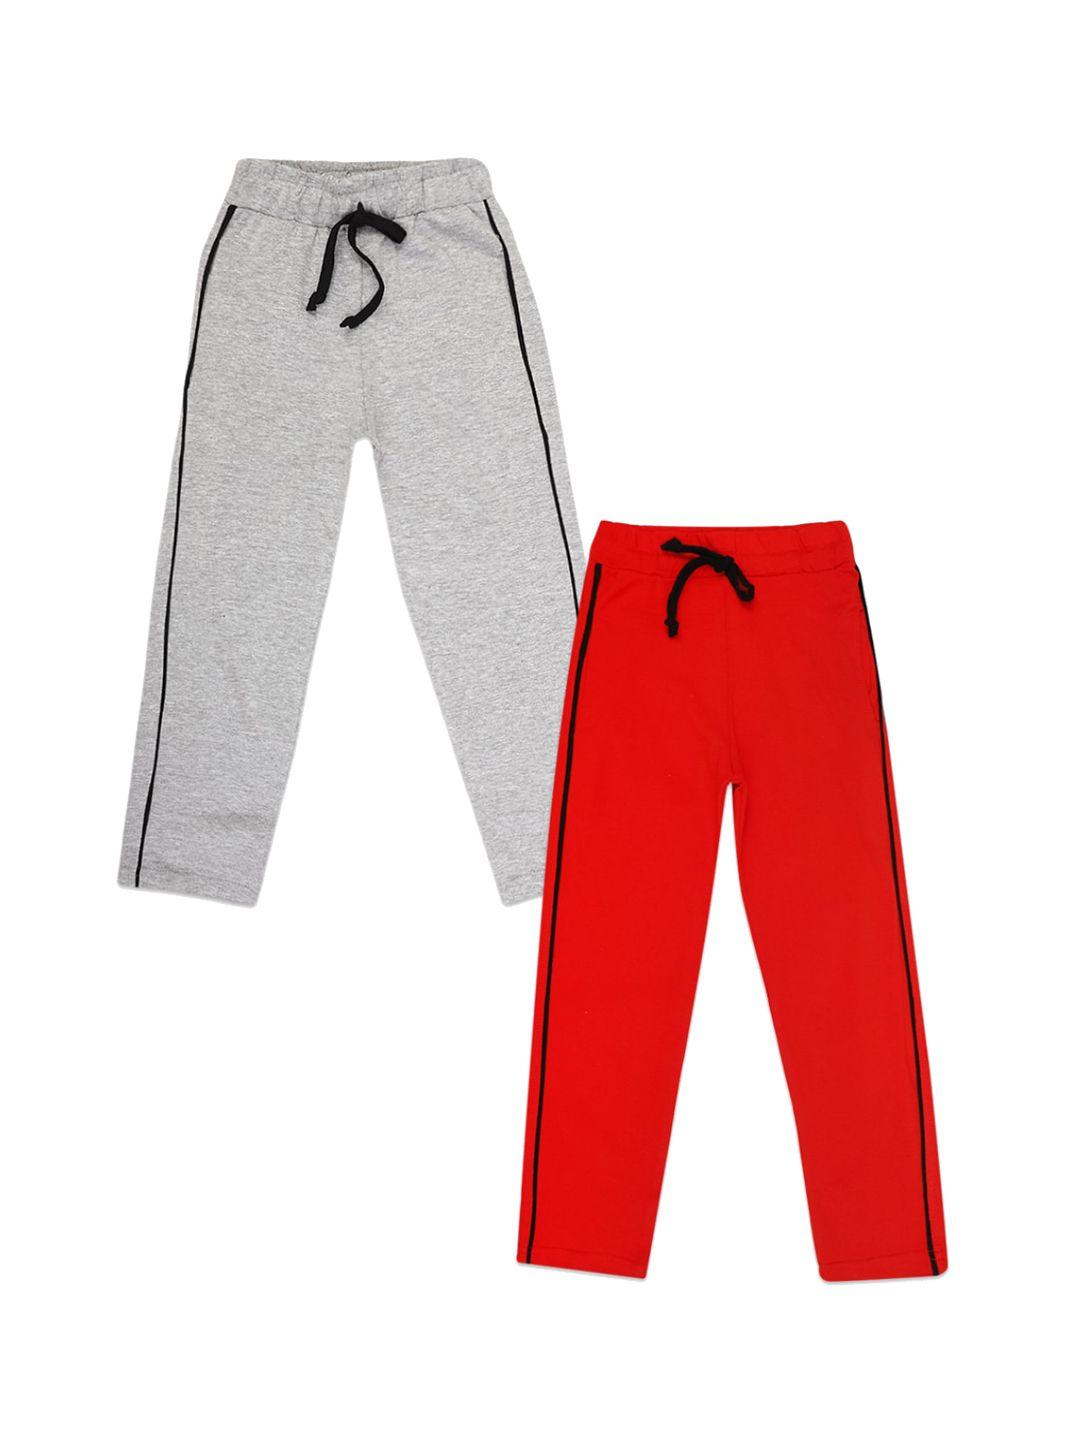 v-mart boys pack of 2 solid grey & red cotton single jersey lounge pants